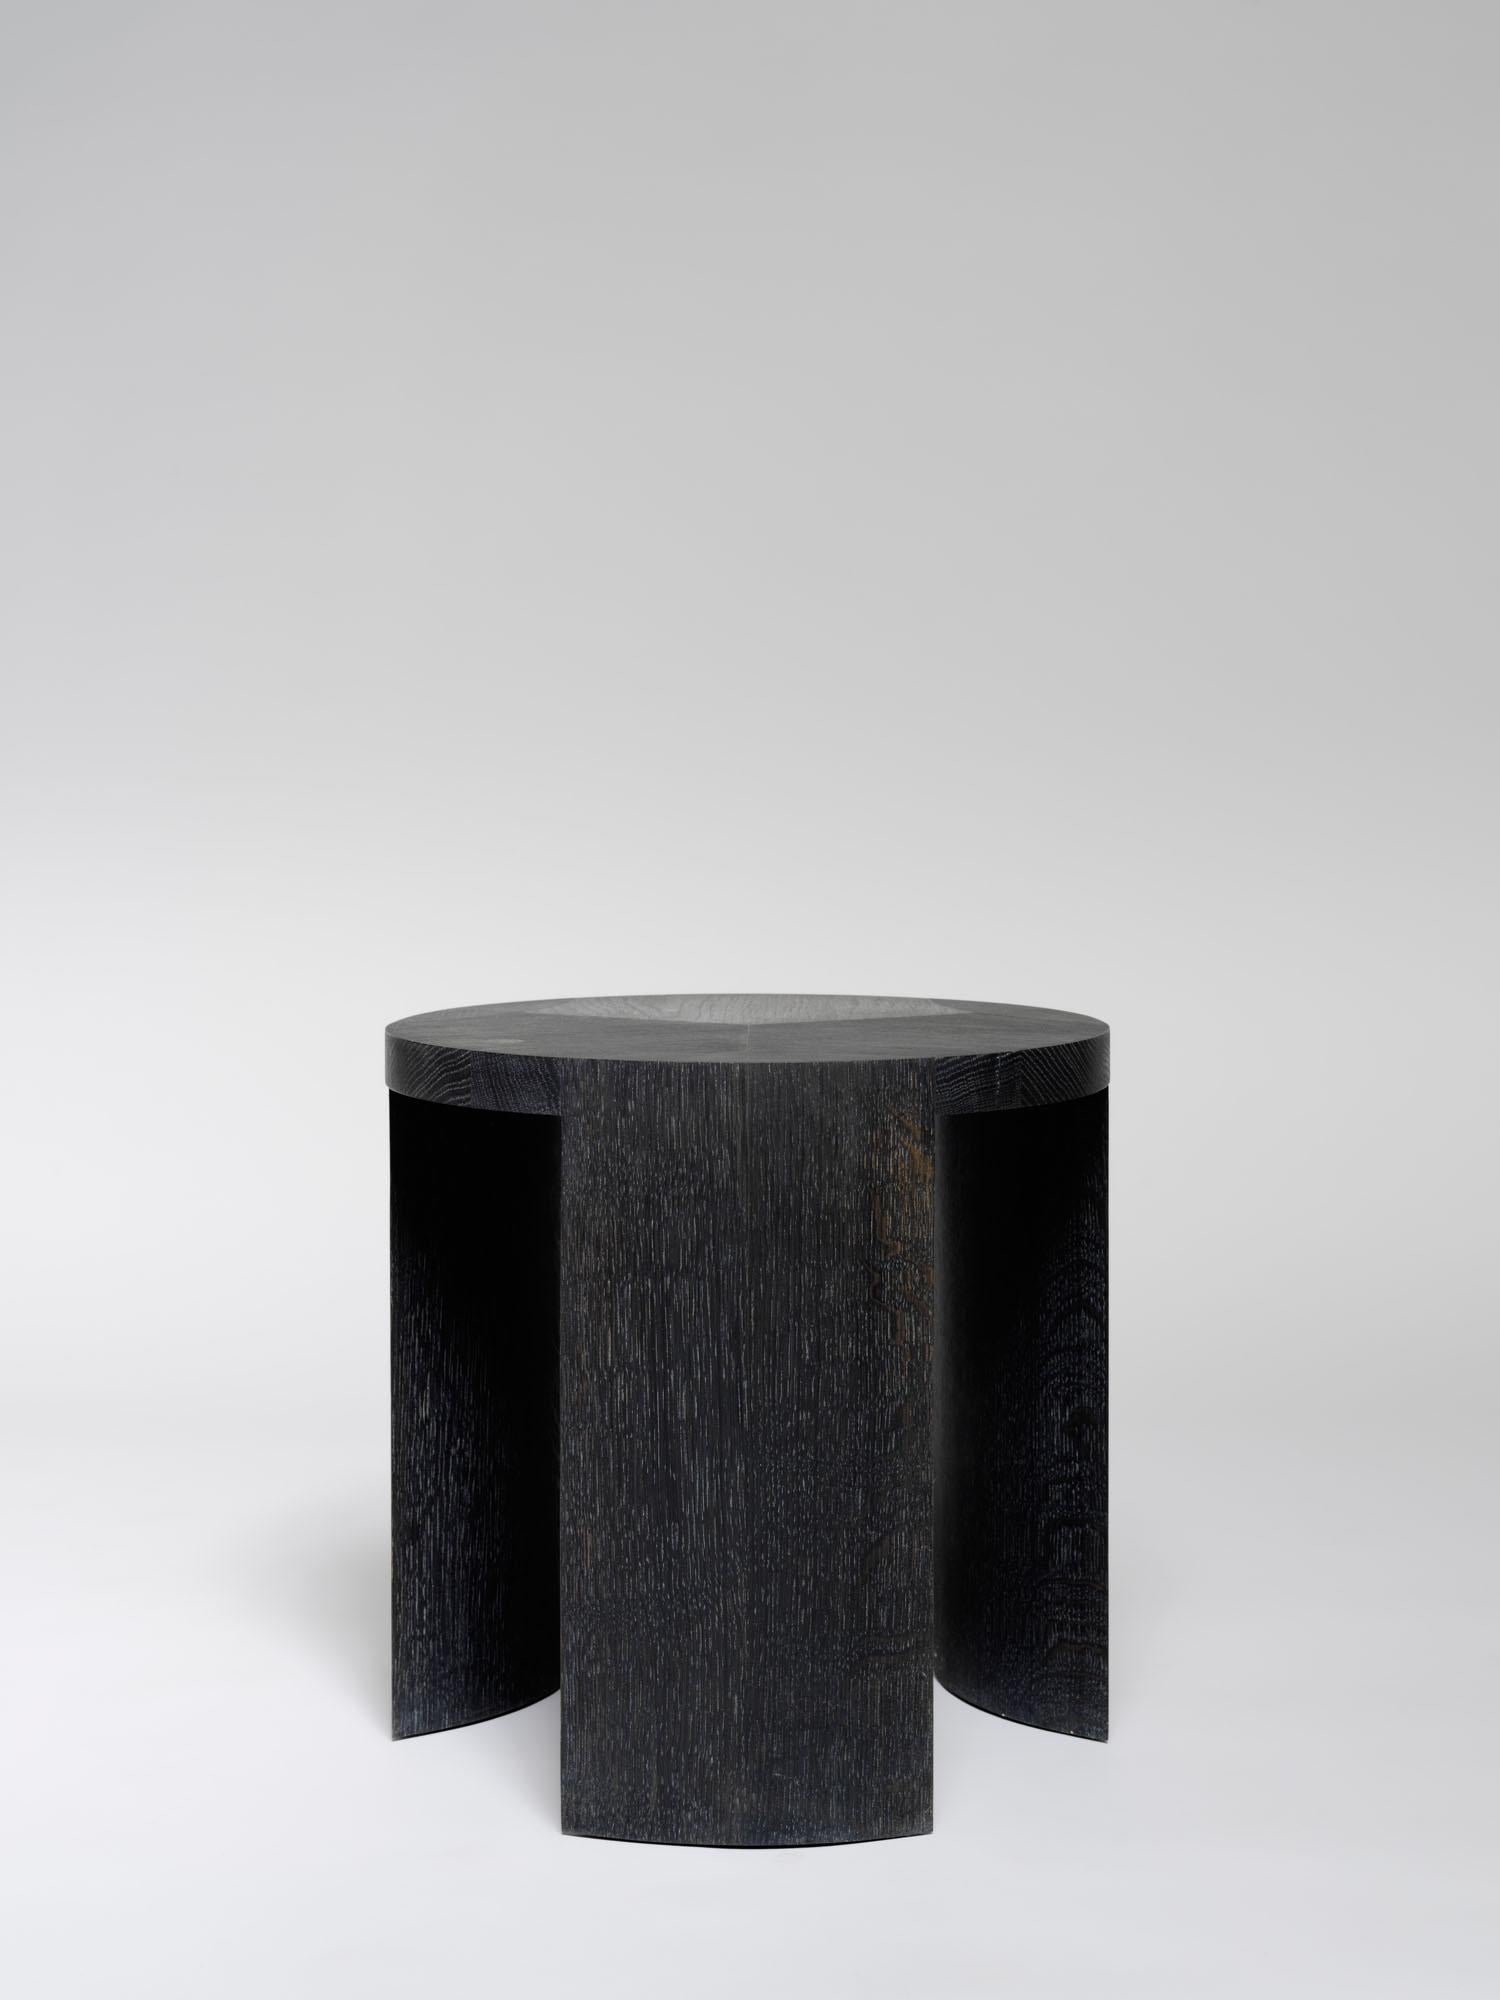 Contemporary Solid Oak Nort Coffee Table by Tim Vranken